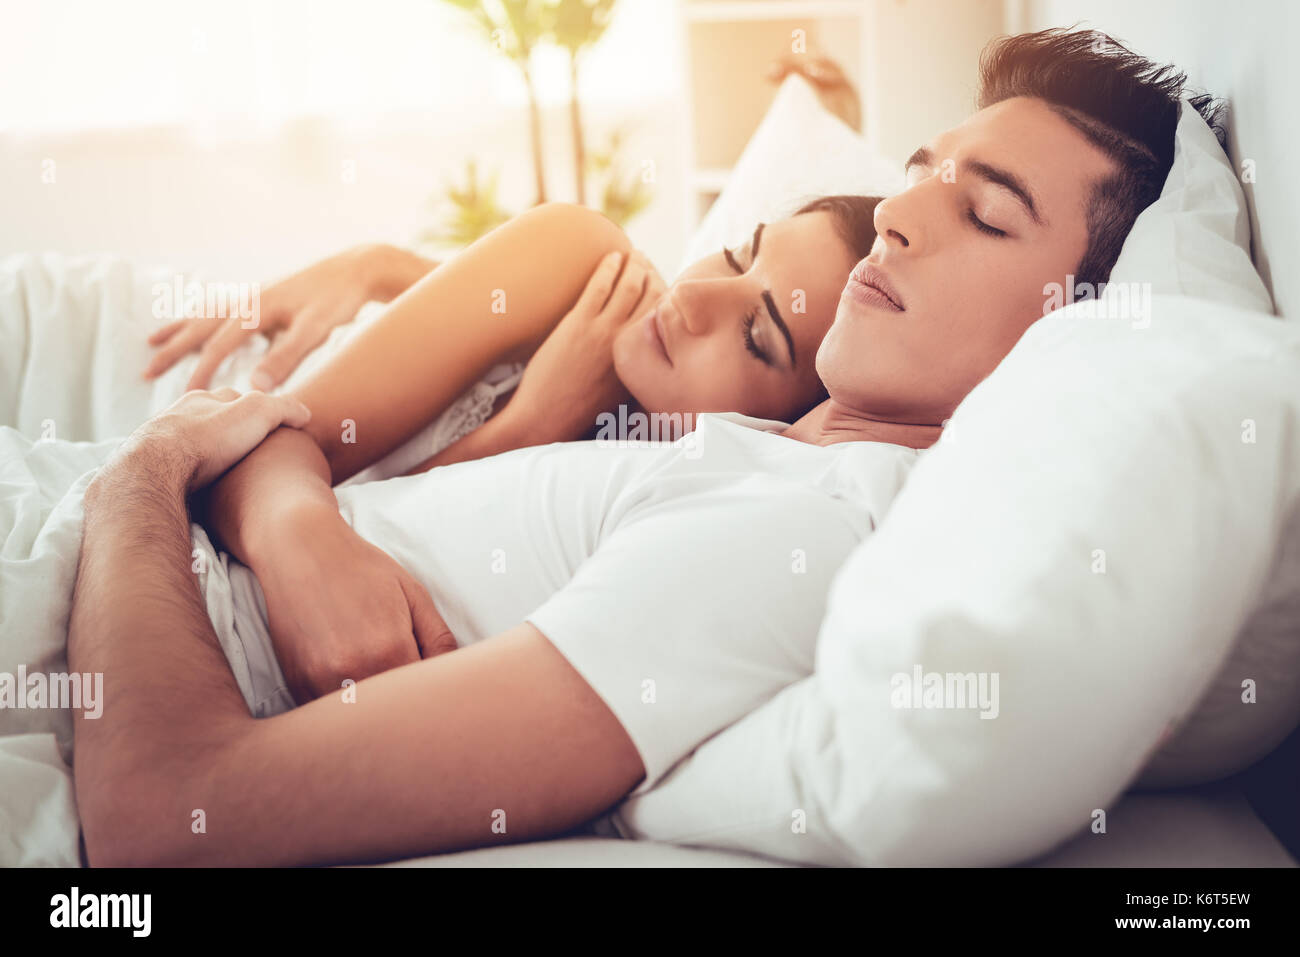 Romantic hugging young couple sleeping in bed Stock Photo - Alamy